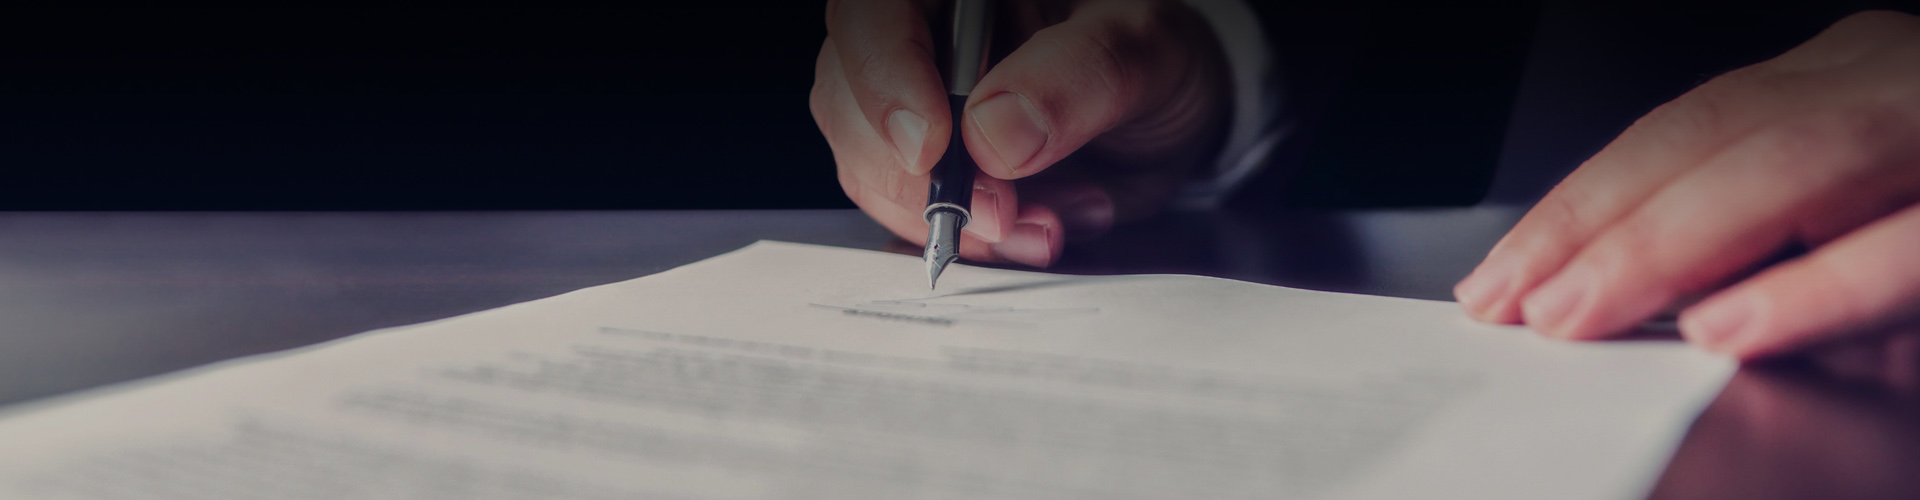 Closeup photo of person signing a legal document